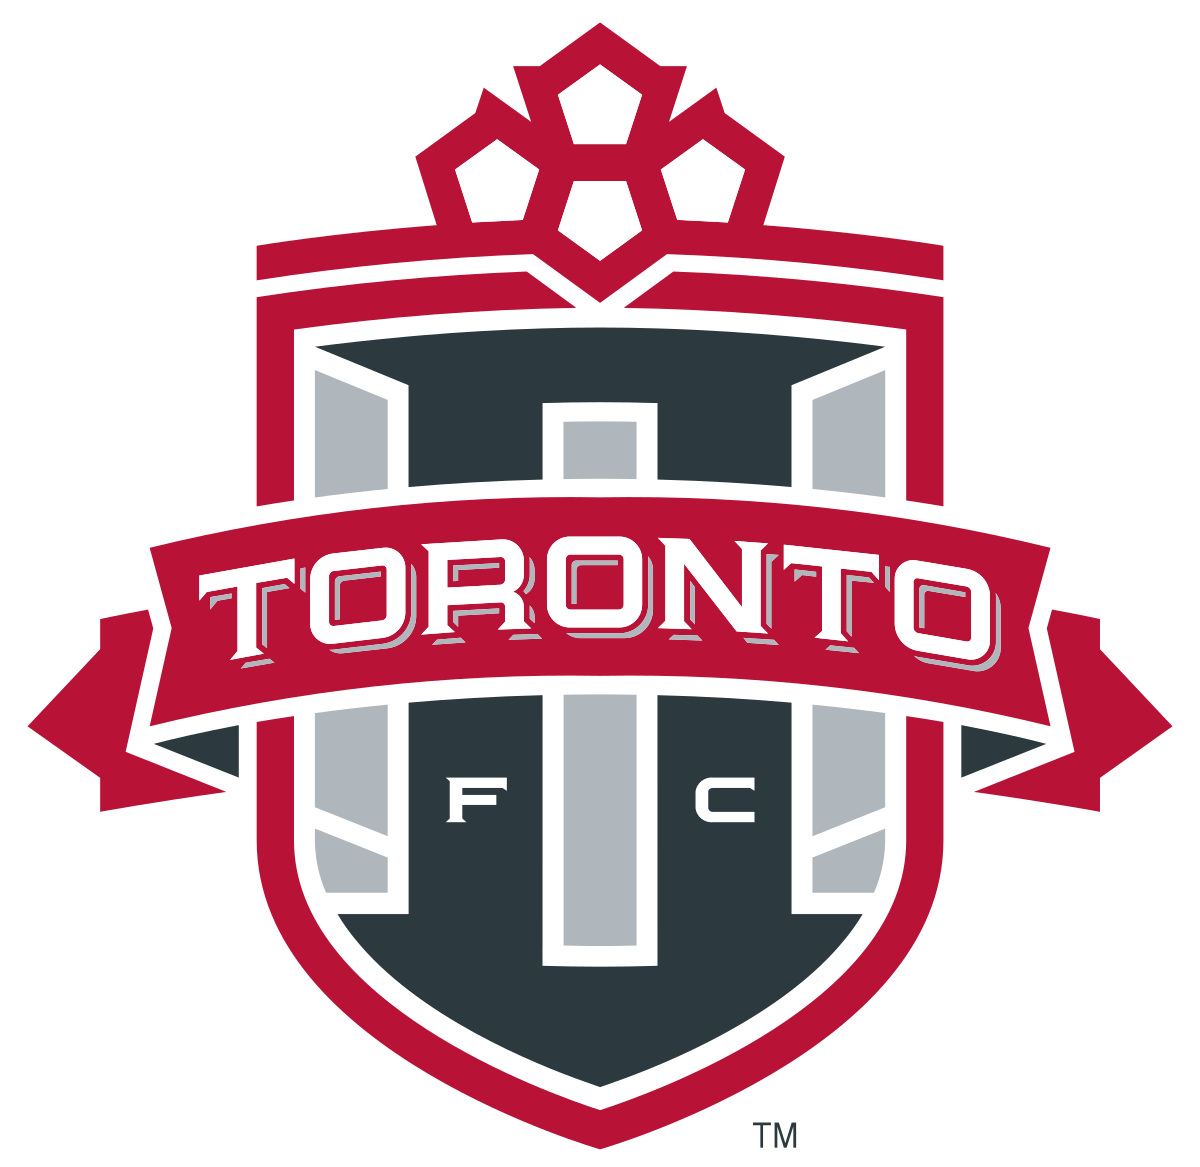 Fc Toronto Clipart - Large Size Png Image - PikPng